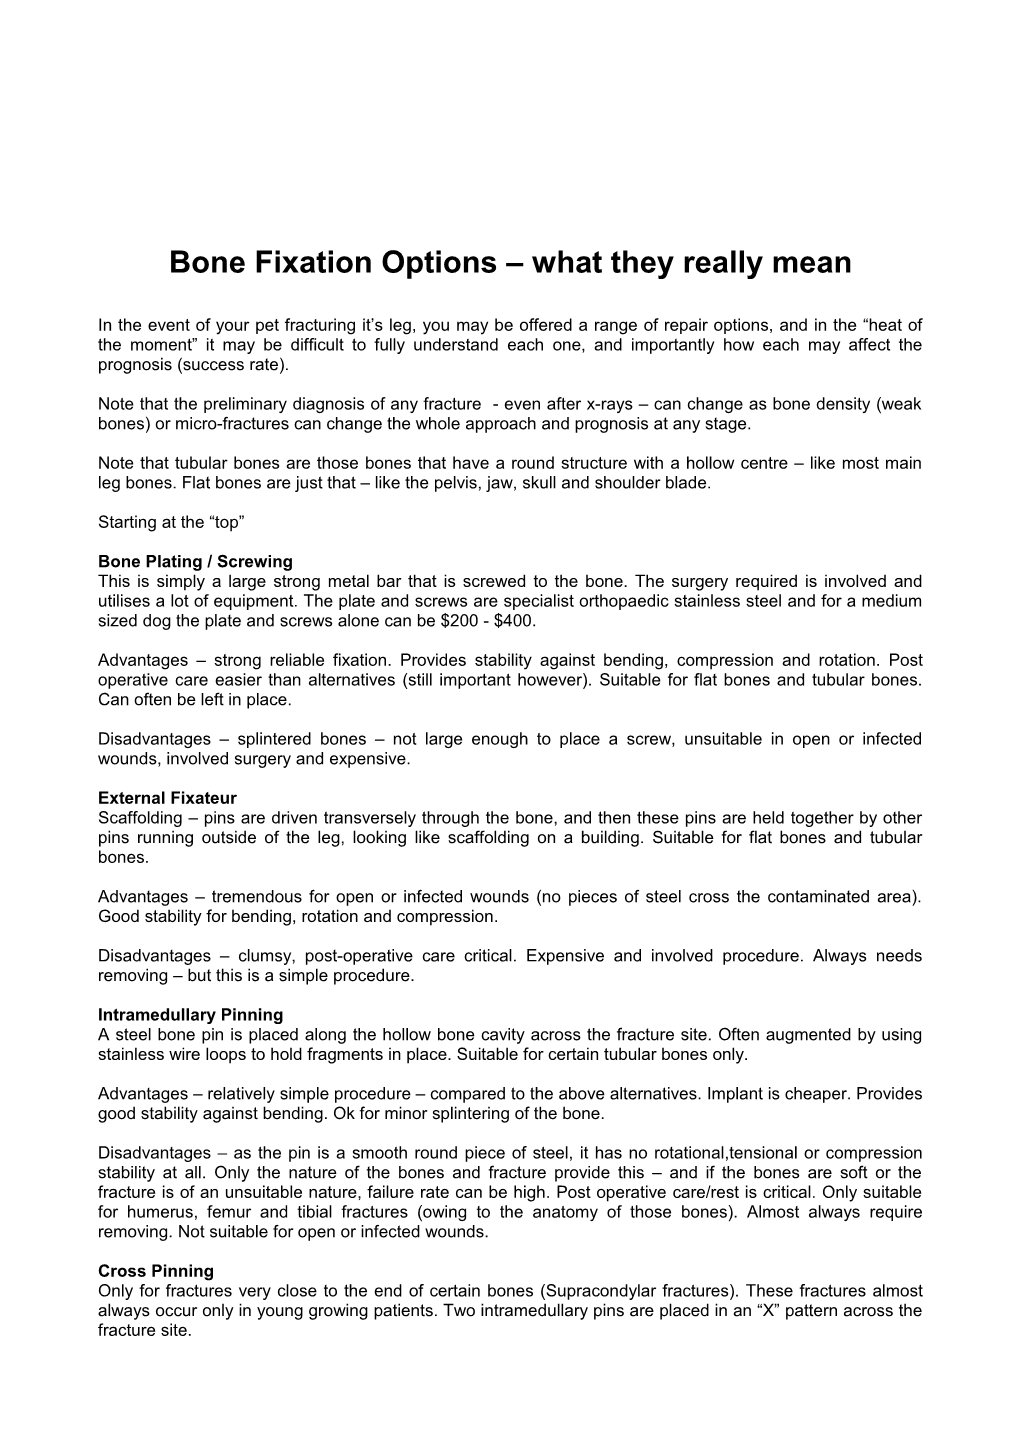 Bone Fixation Options What They Really Mean